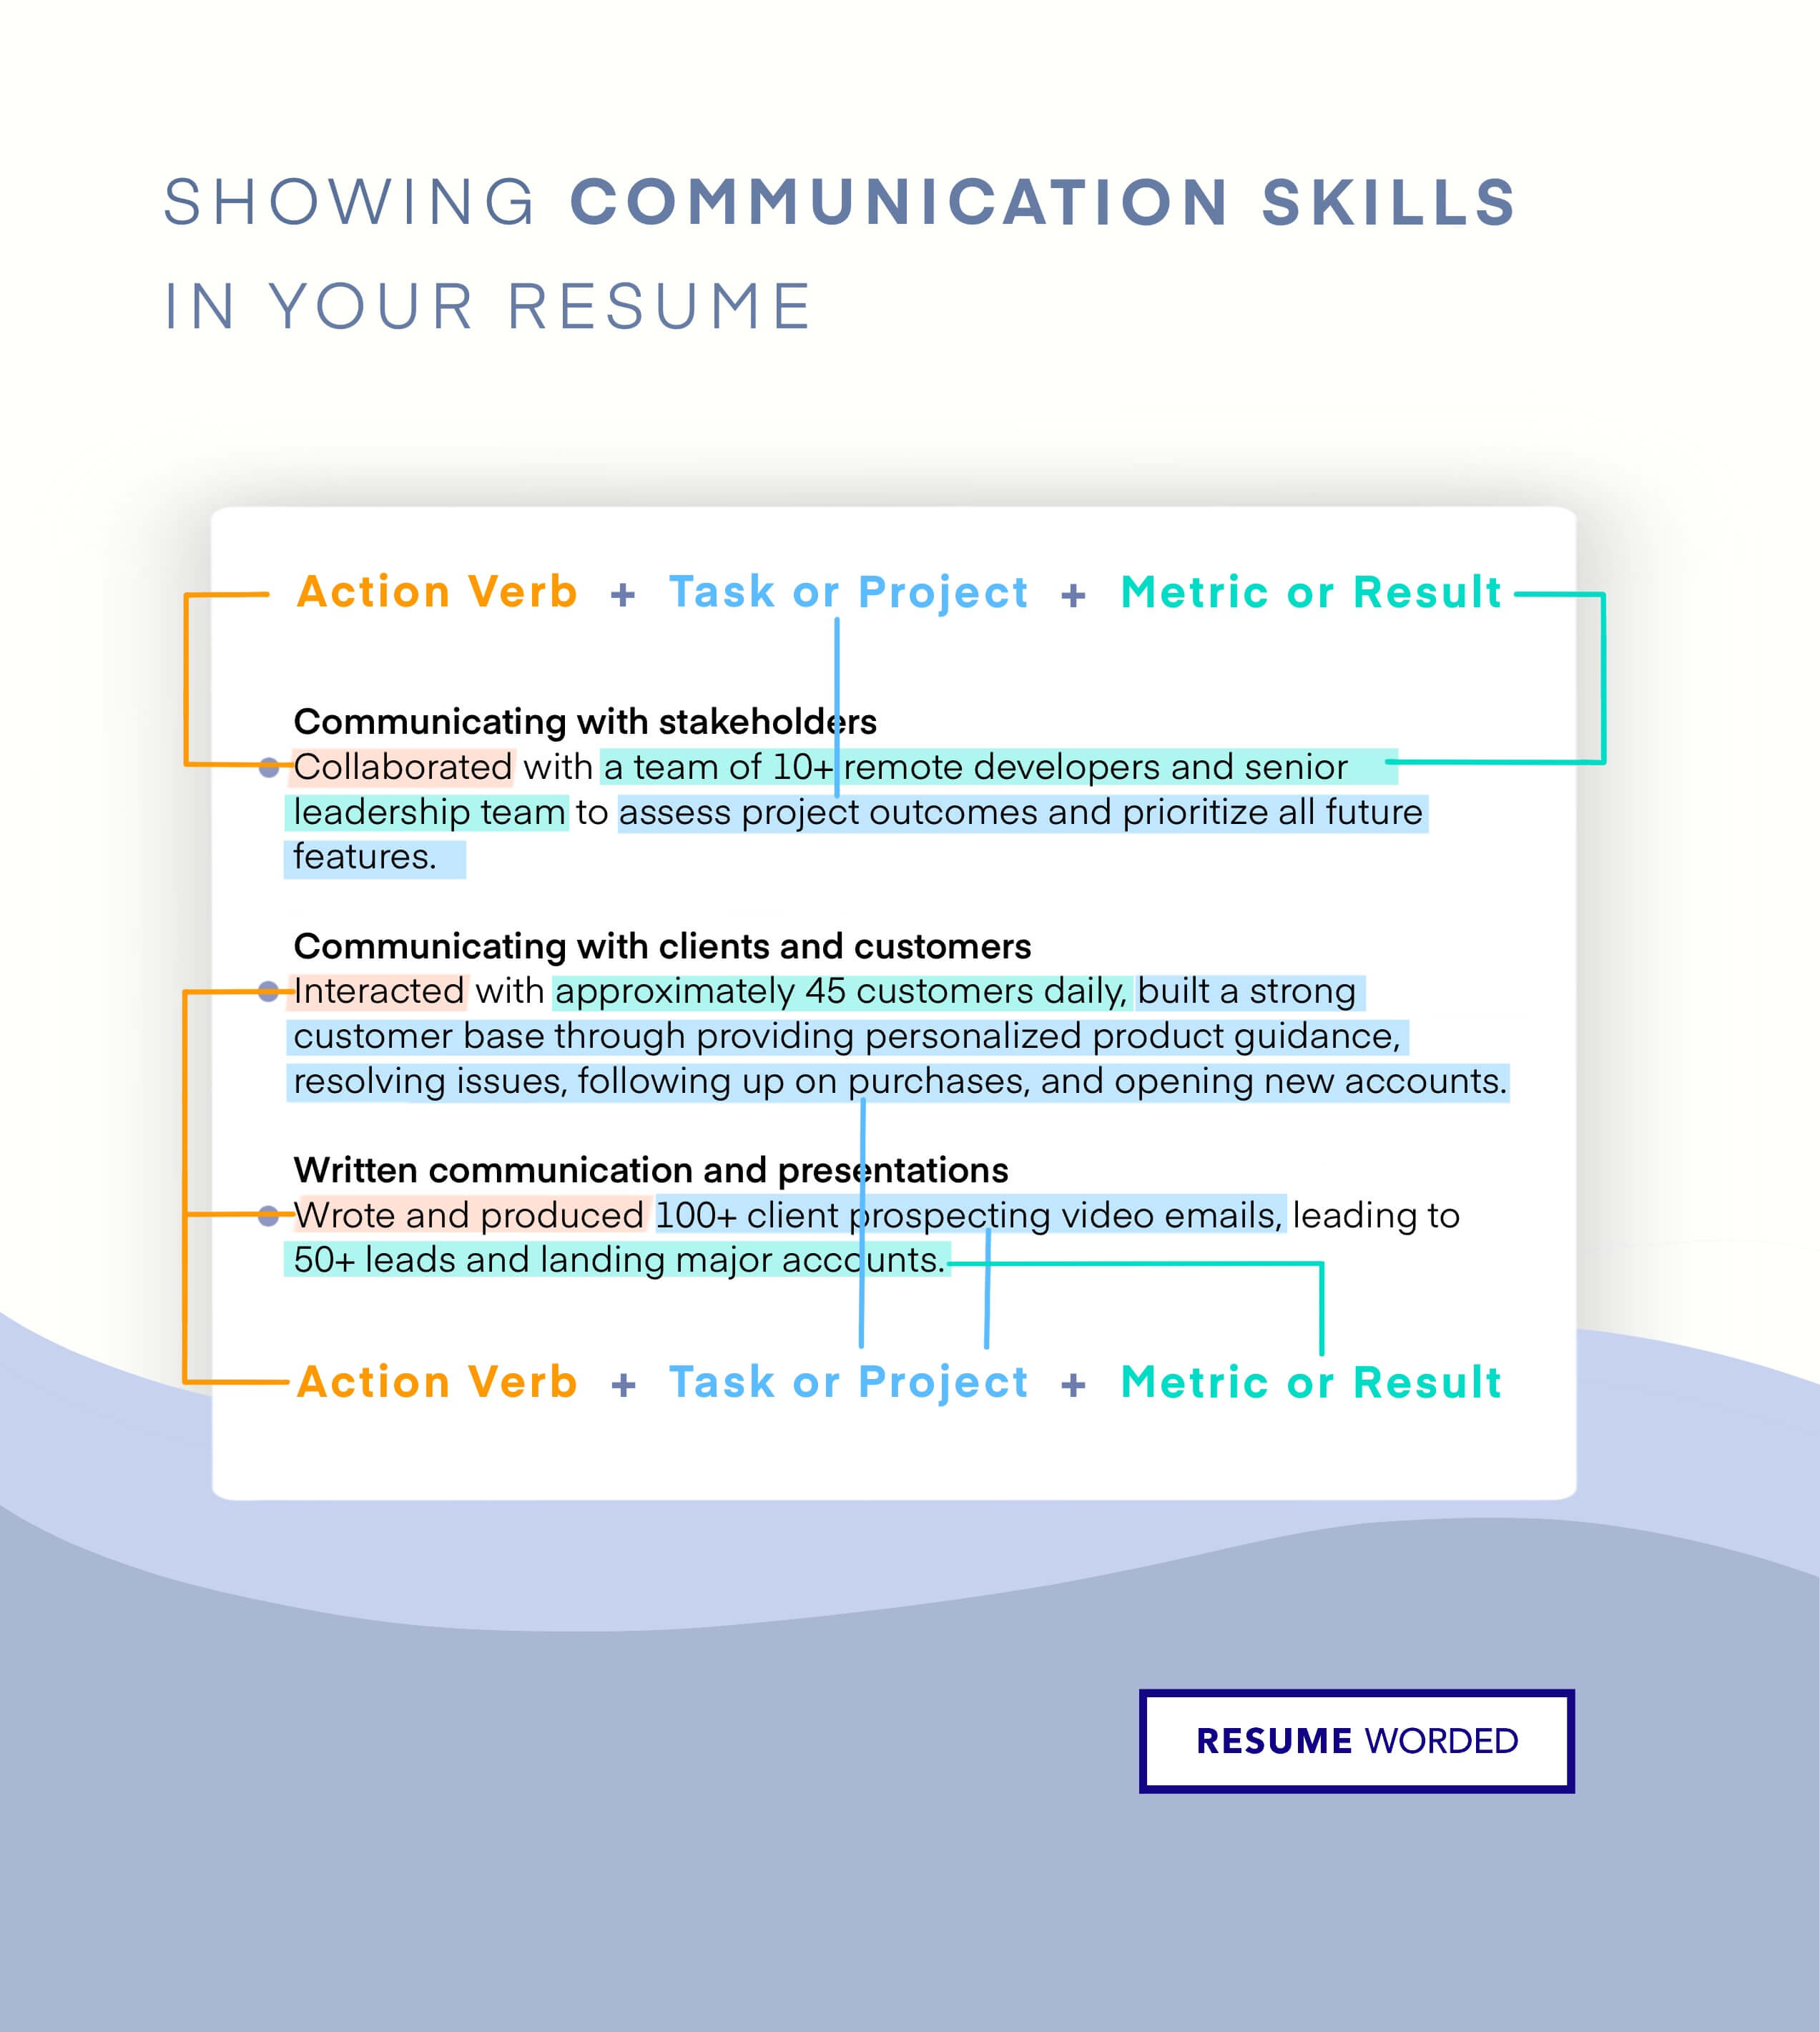 How to show communication skills through your bullet points